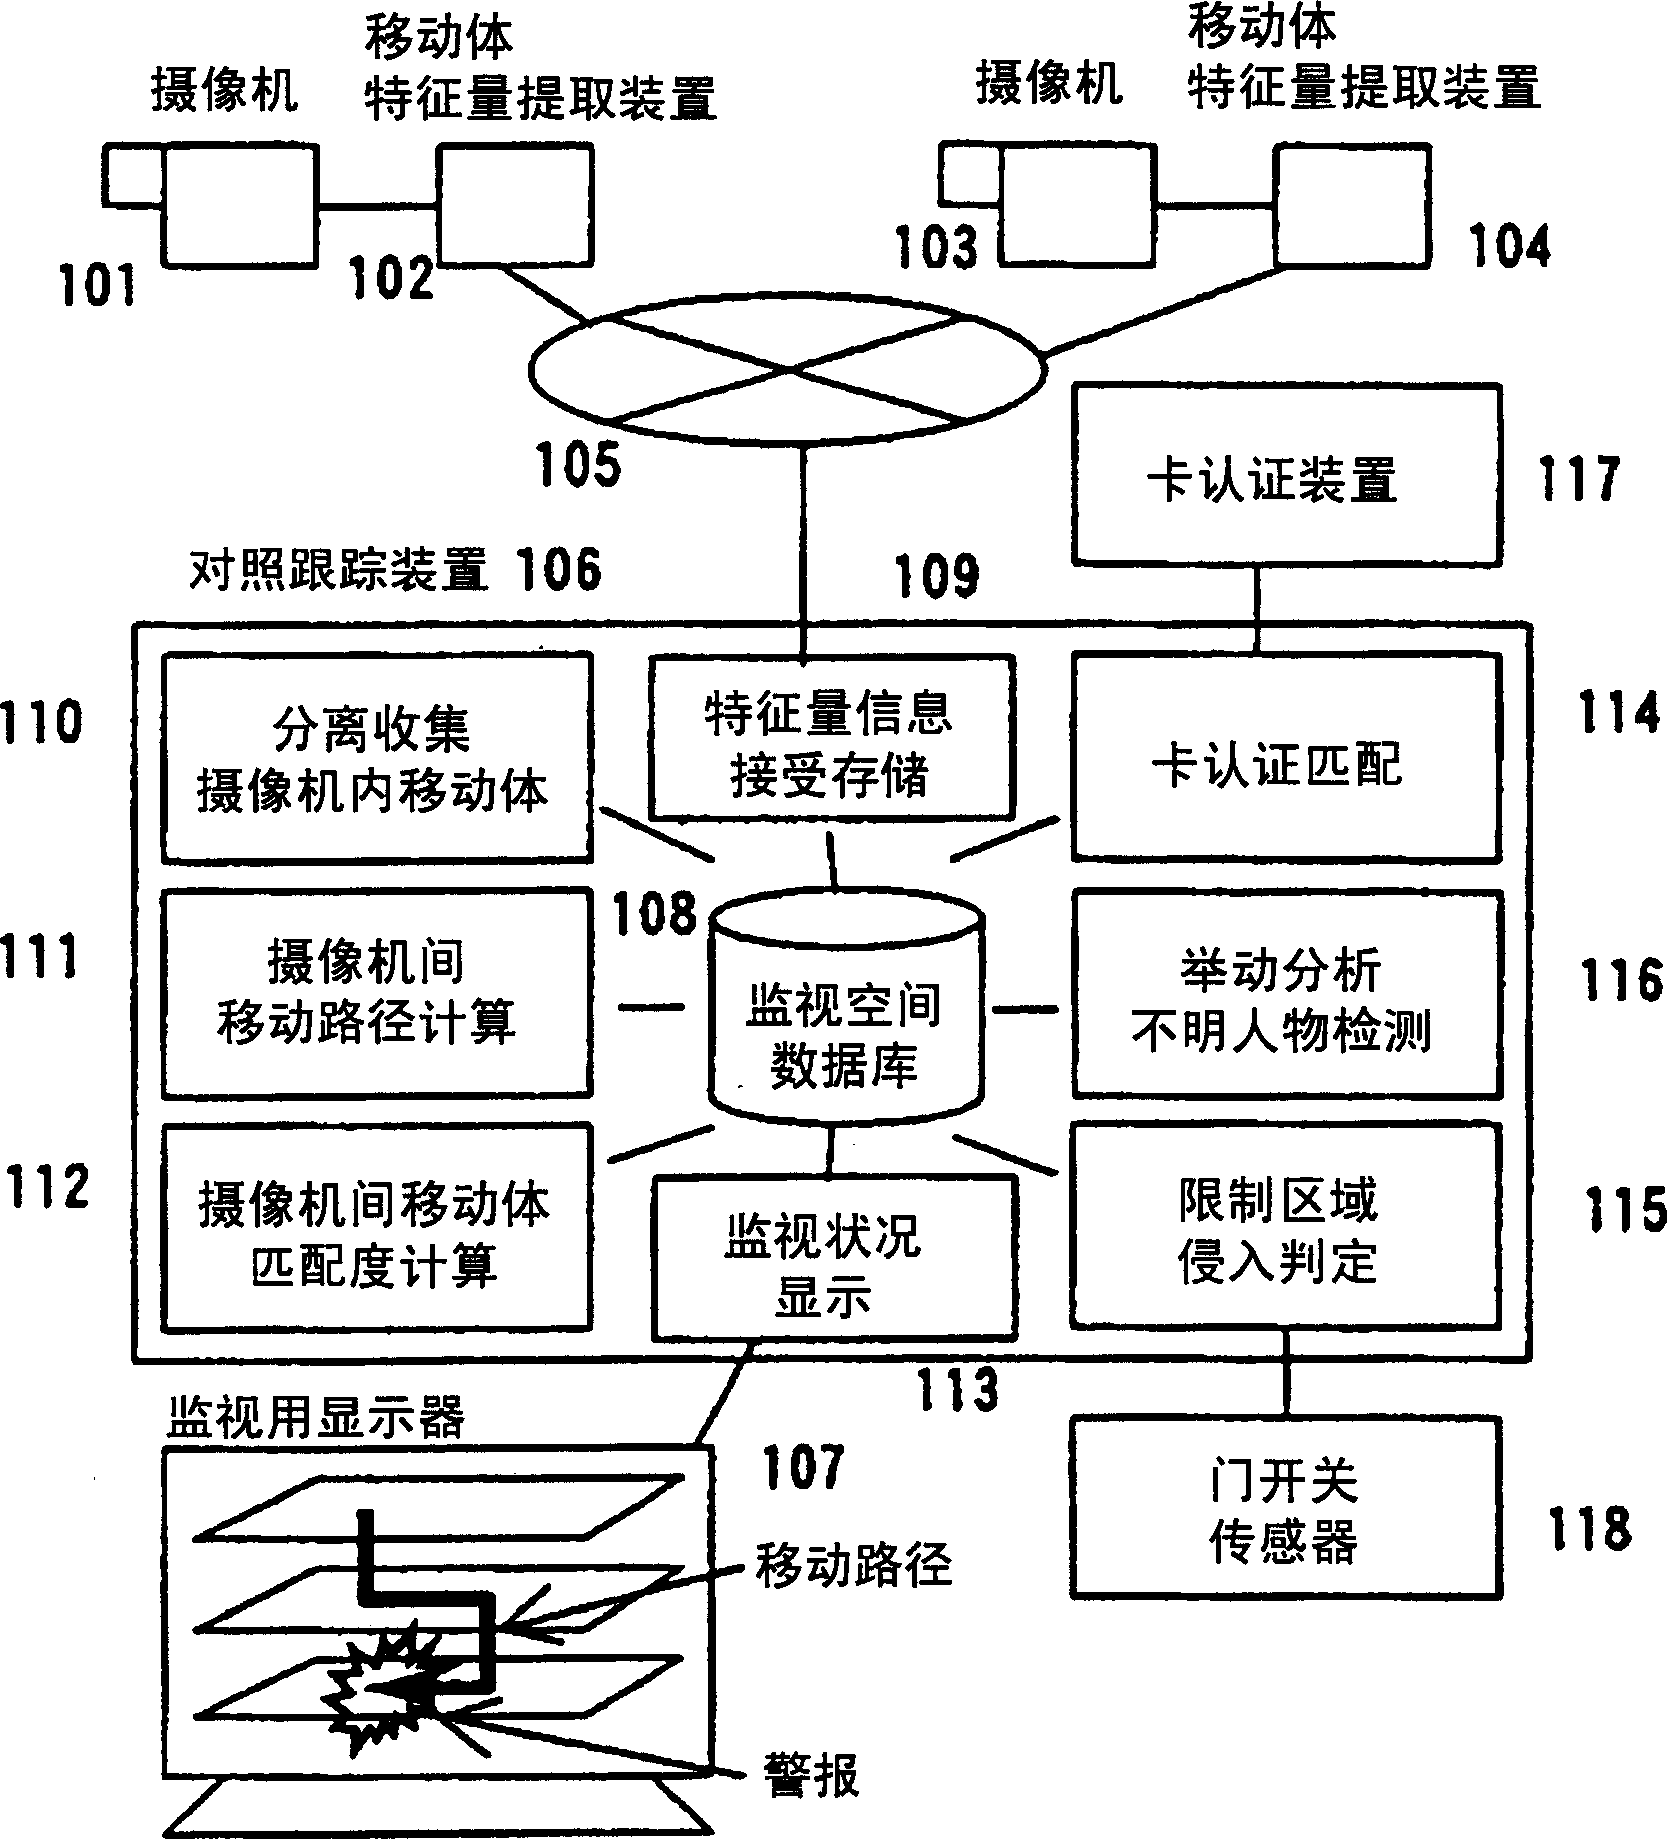 Monitoring system using multiple pick-up cameras